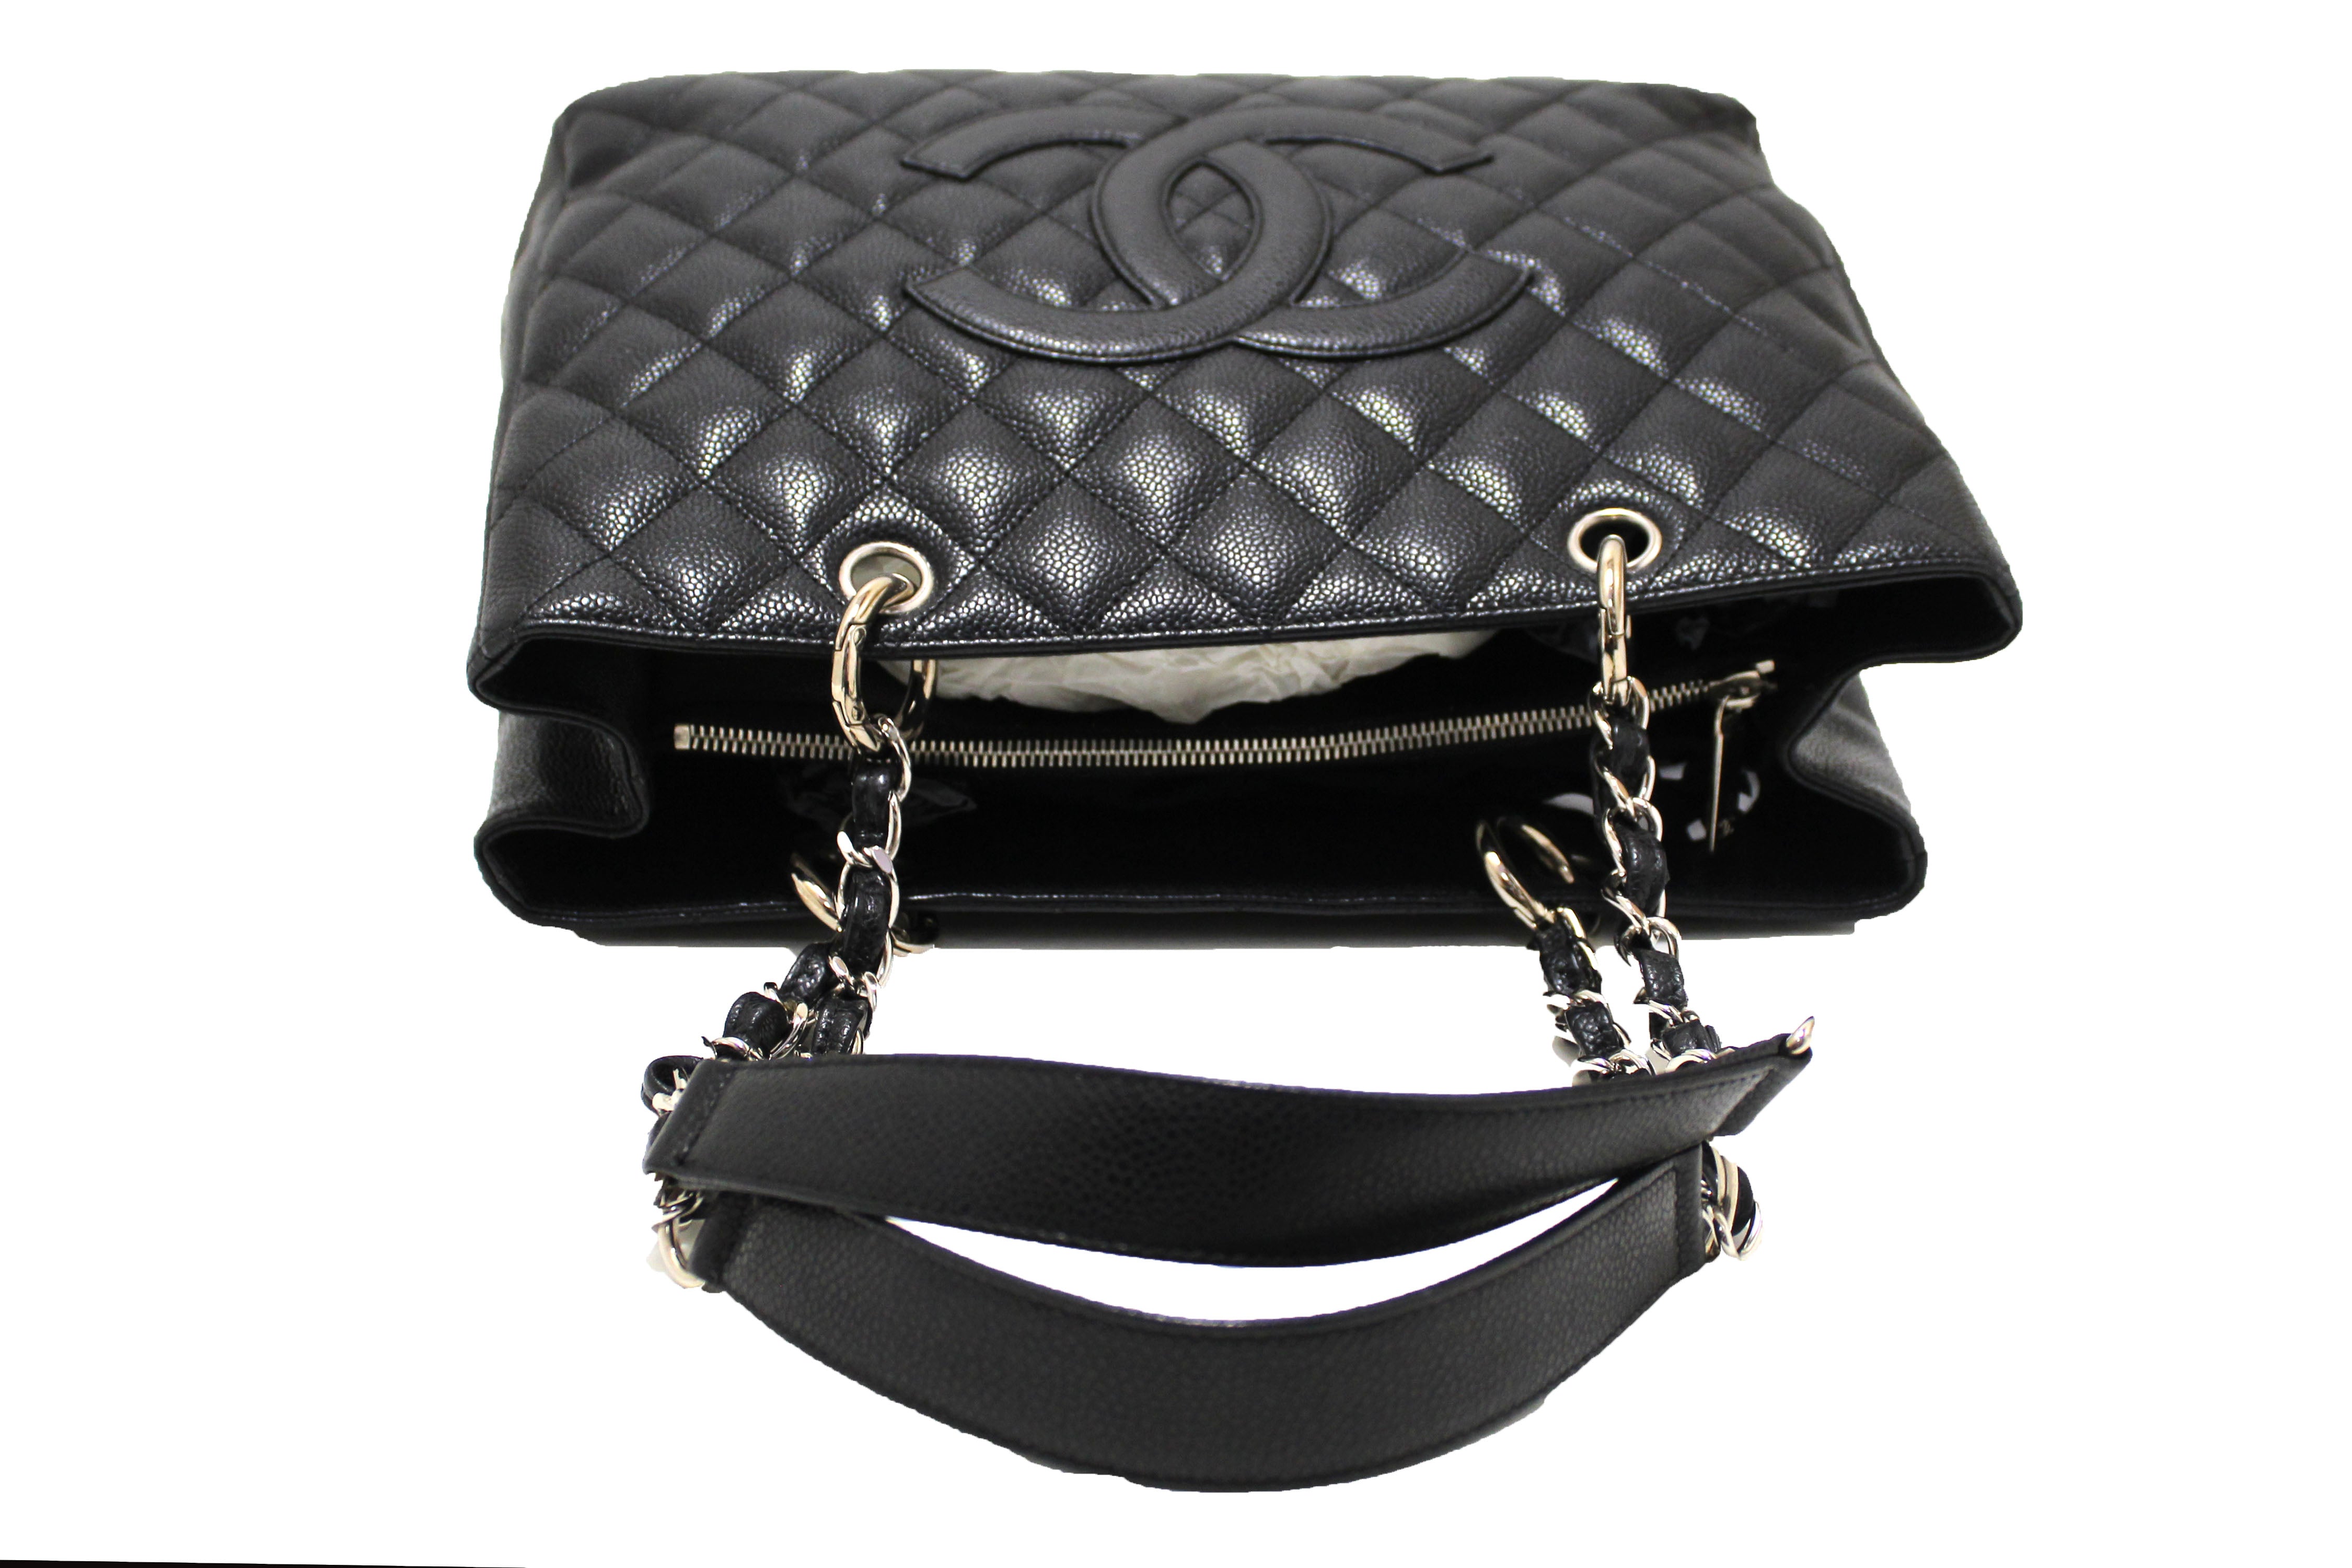 CHANEL Grand Shopping Caviar Leather Tote Bag Black